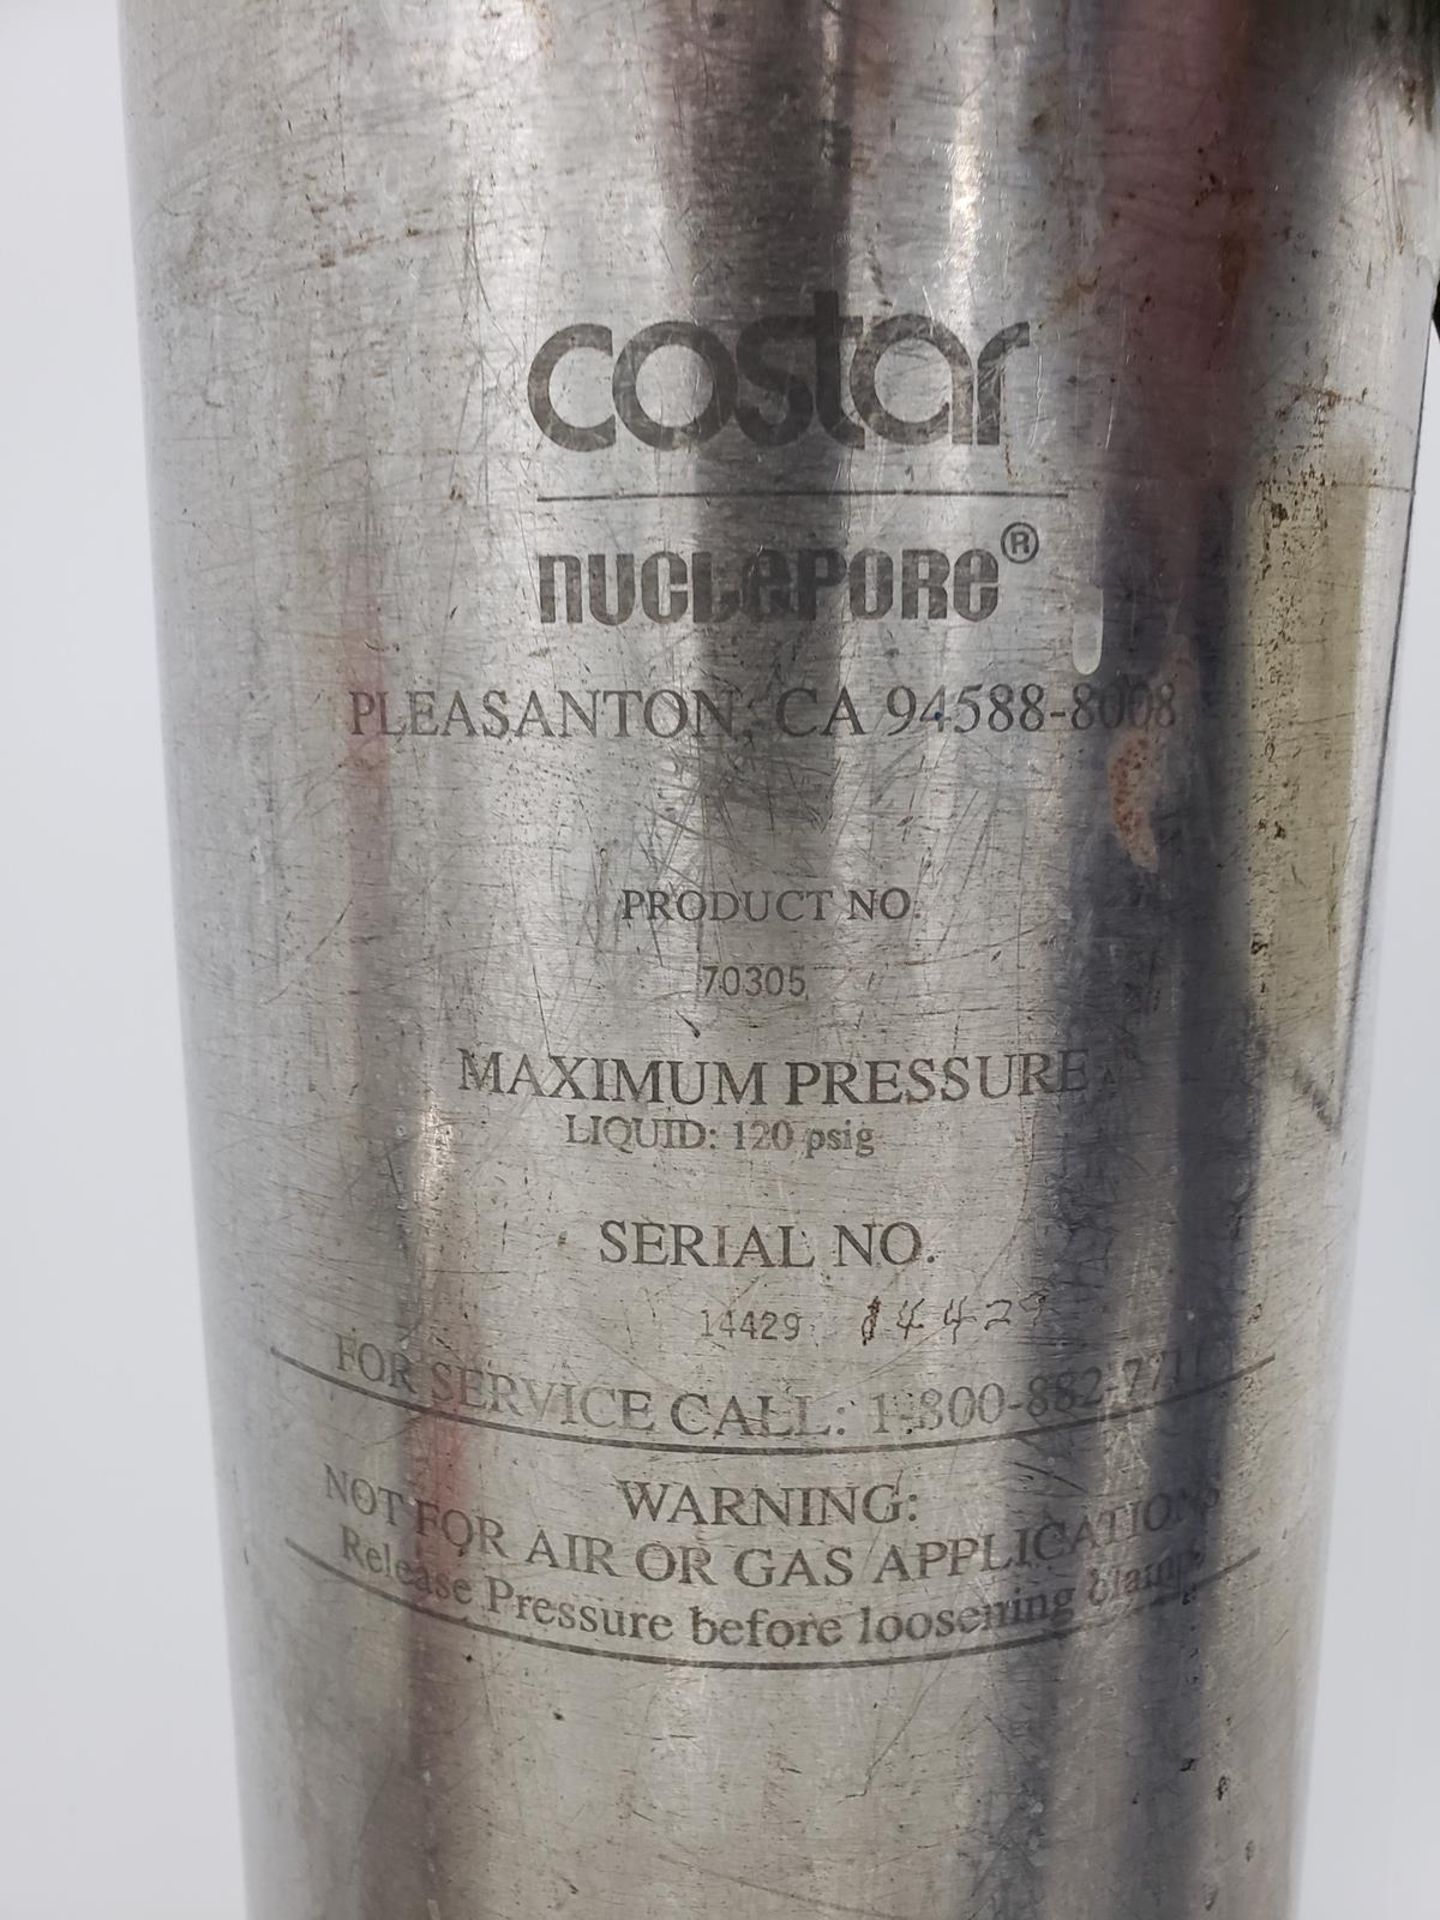 Costar Stainless Steel Cartridge filter | Rig Fee $50 - Image 2 of 2